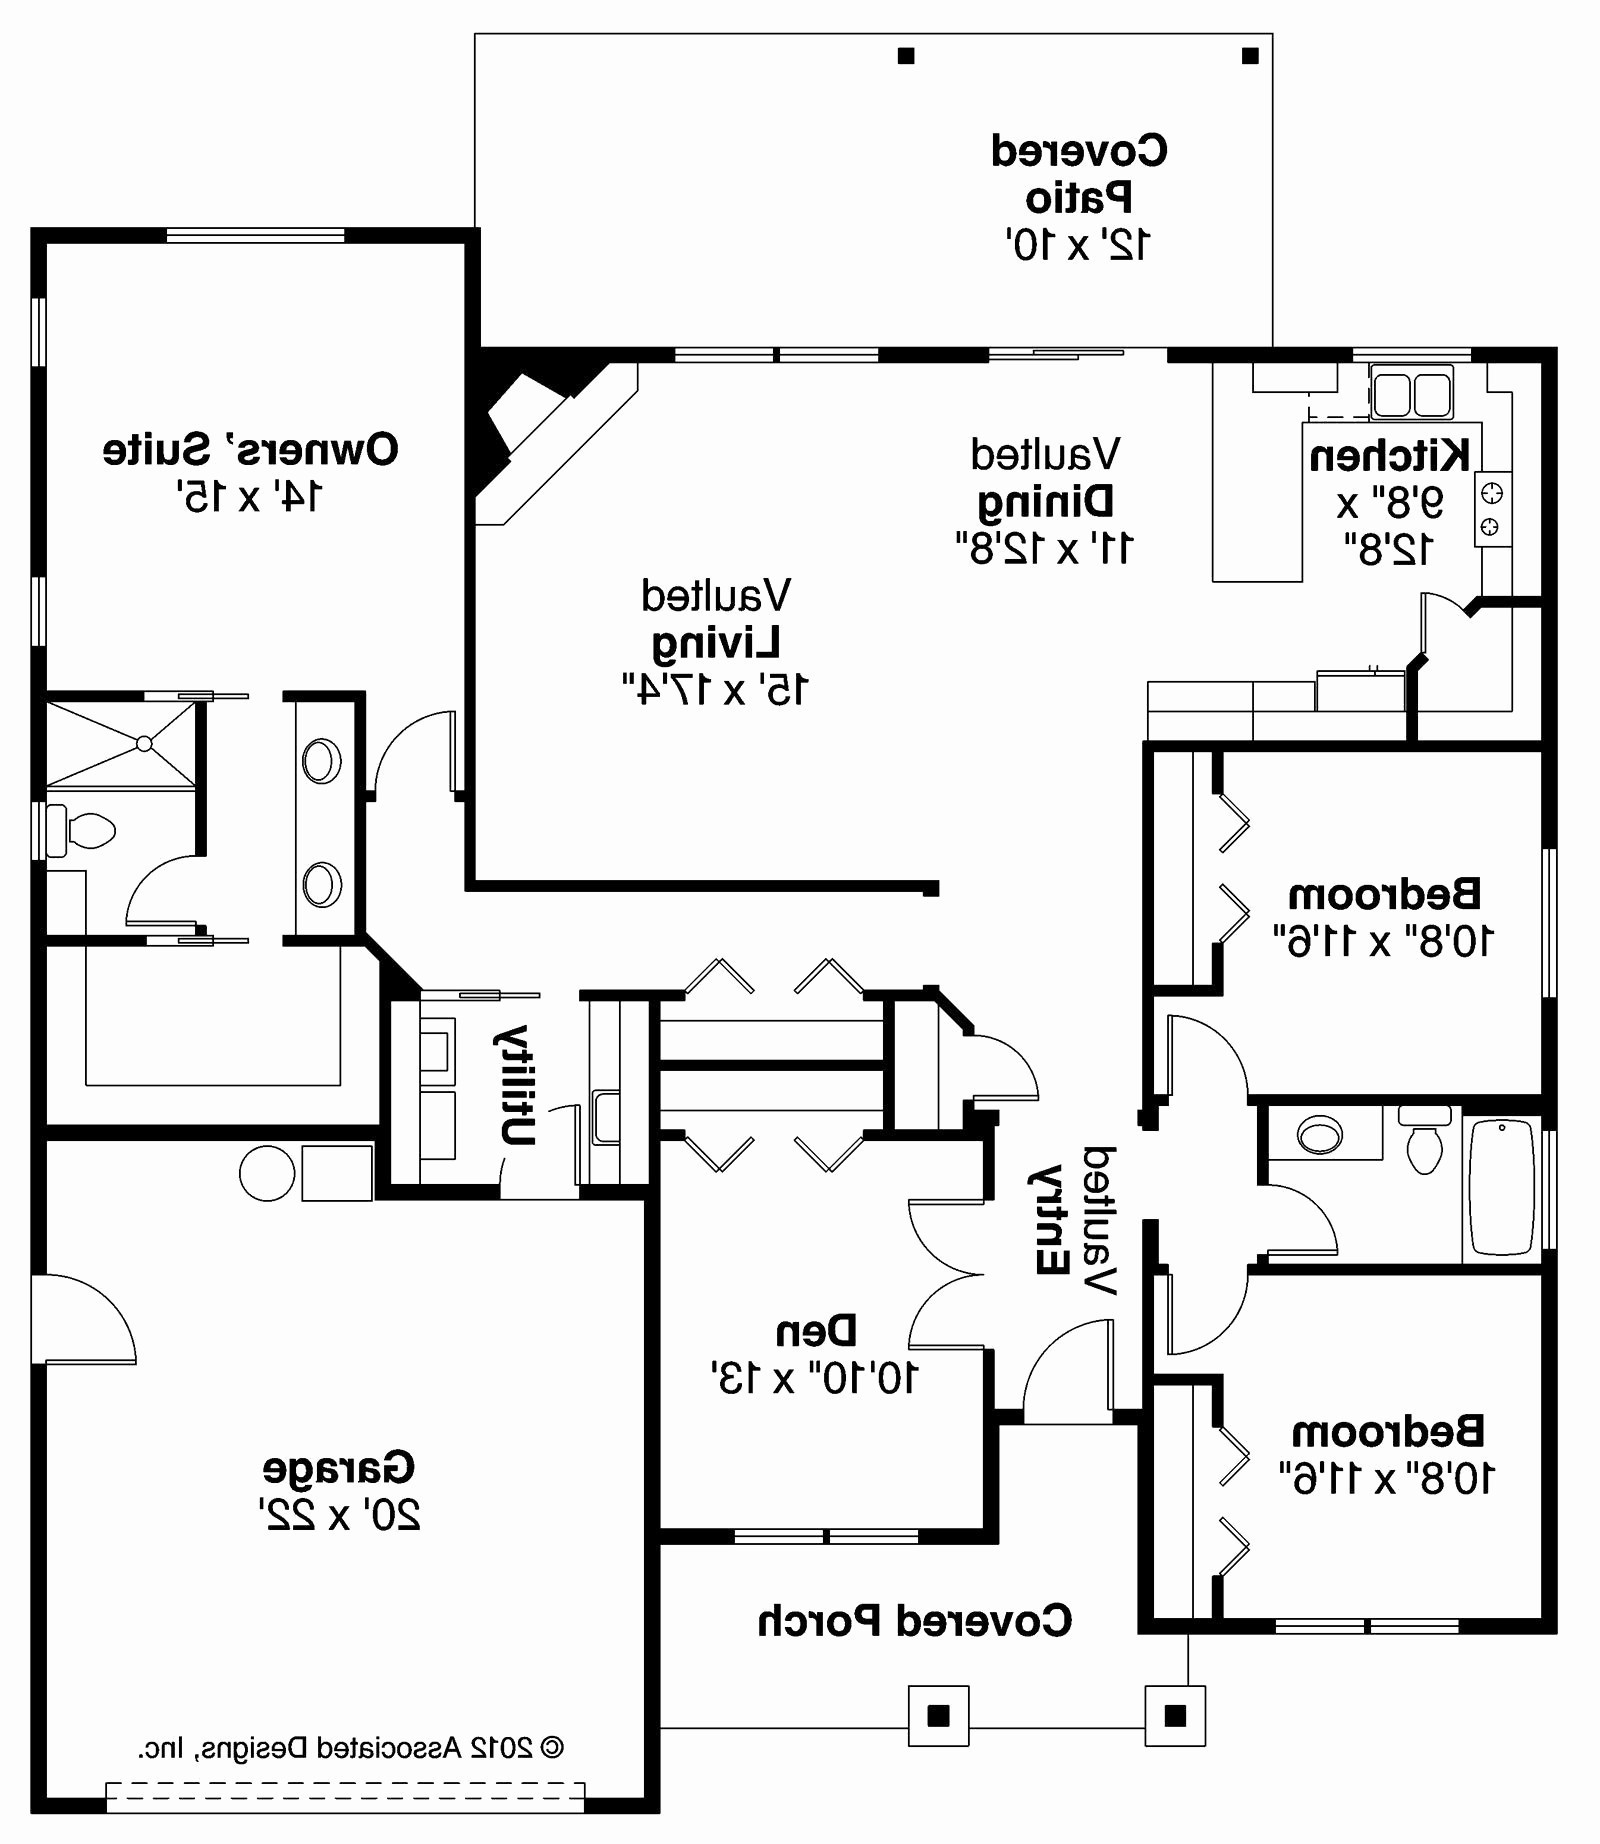 Wiring Diagram For House Lights Fresh House Wiring Diagram Electrical Floor Plan 2004 2010 Bmw X3 E83 3 0d